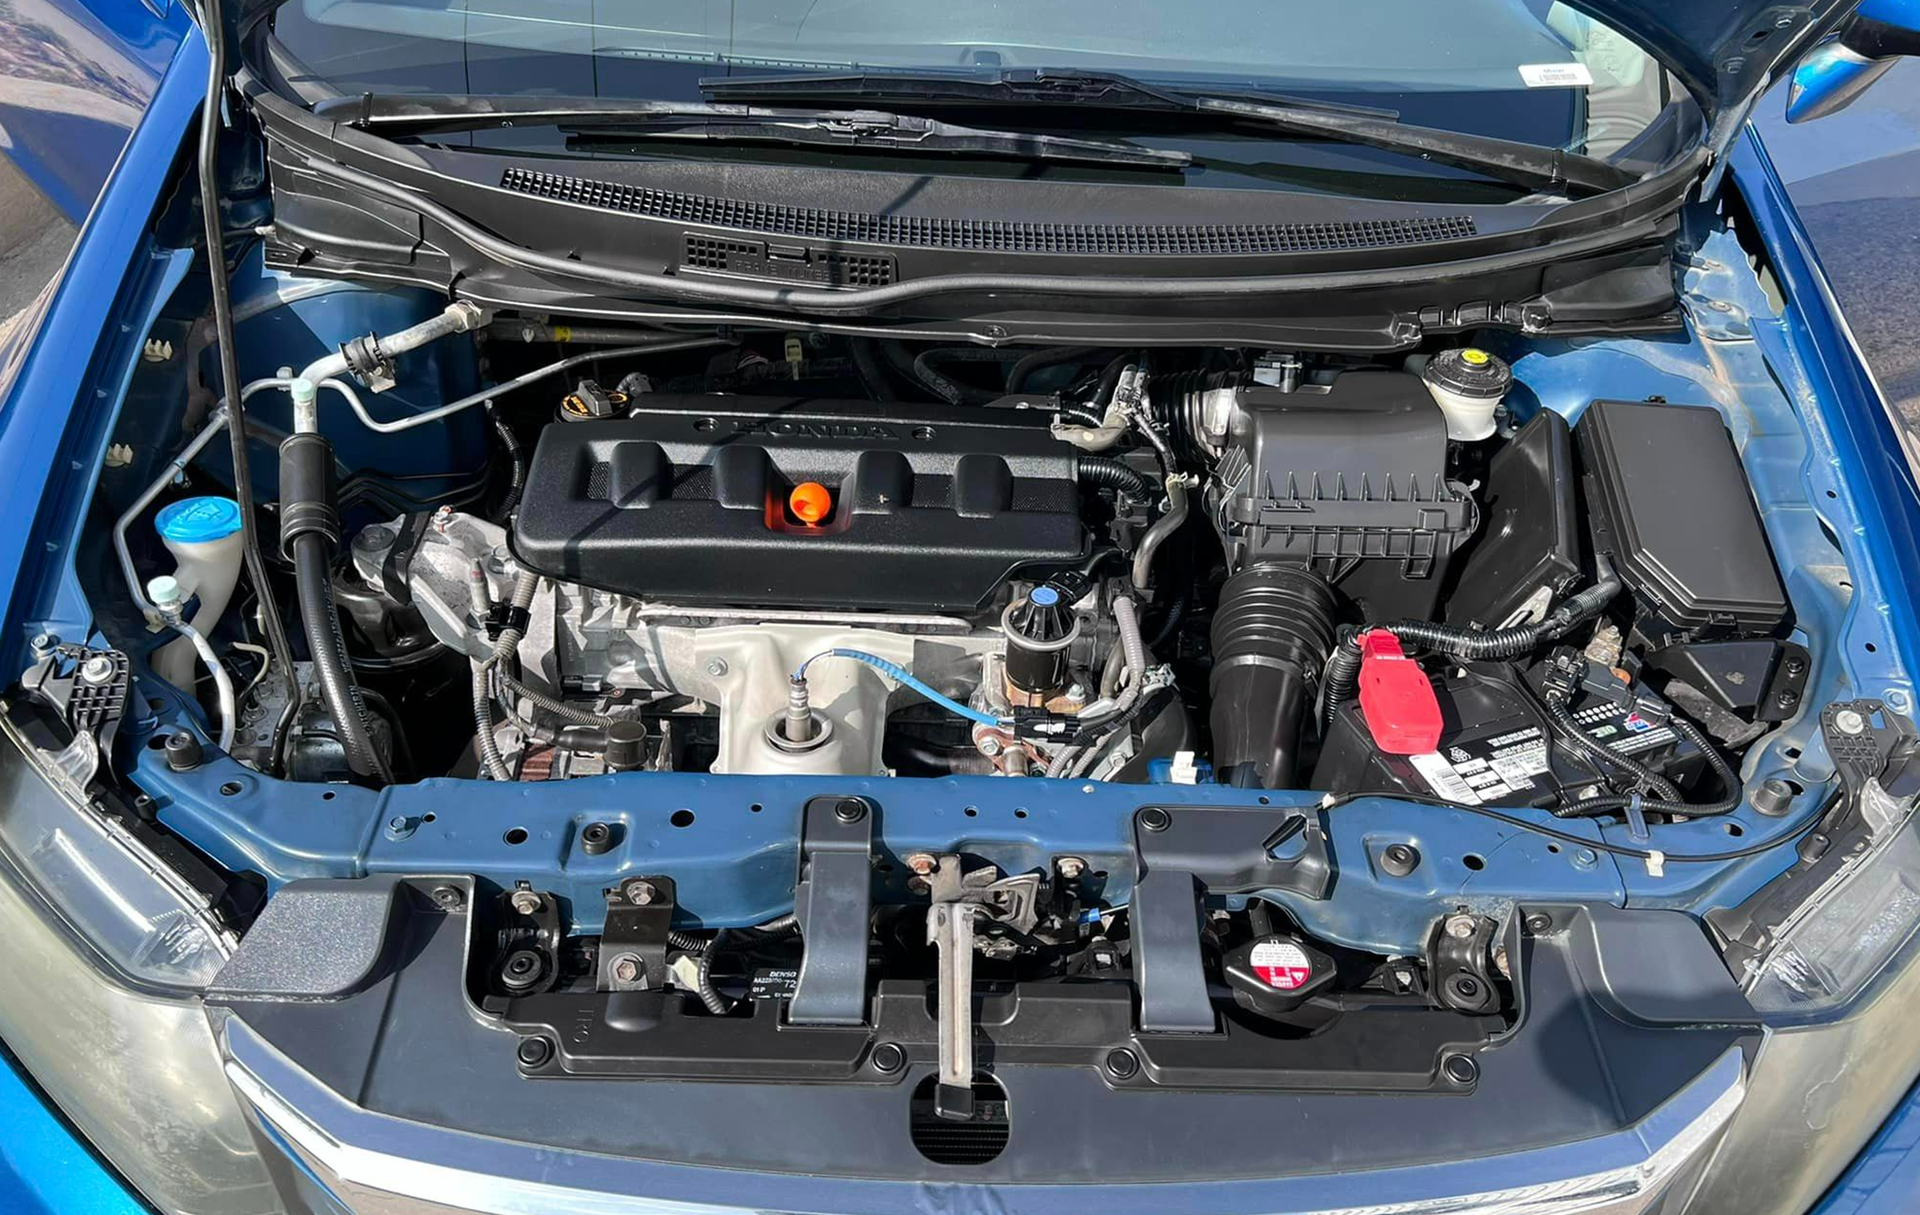 Auto engine cleaning